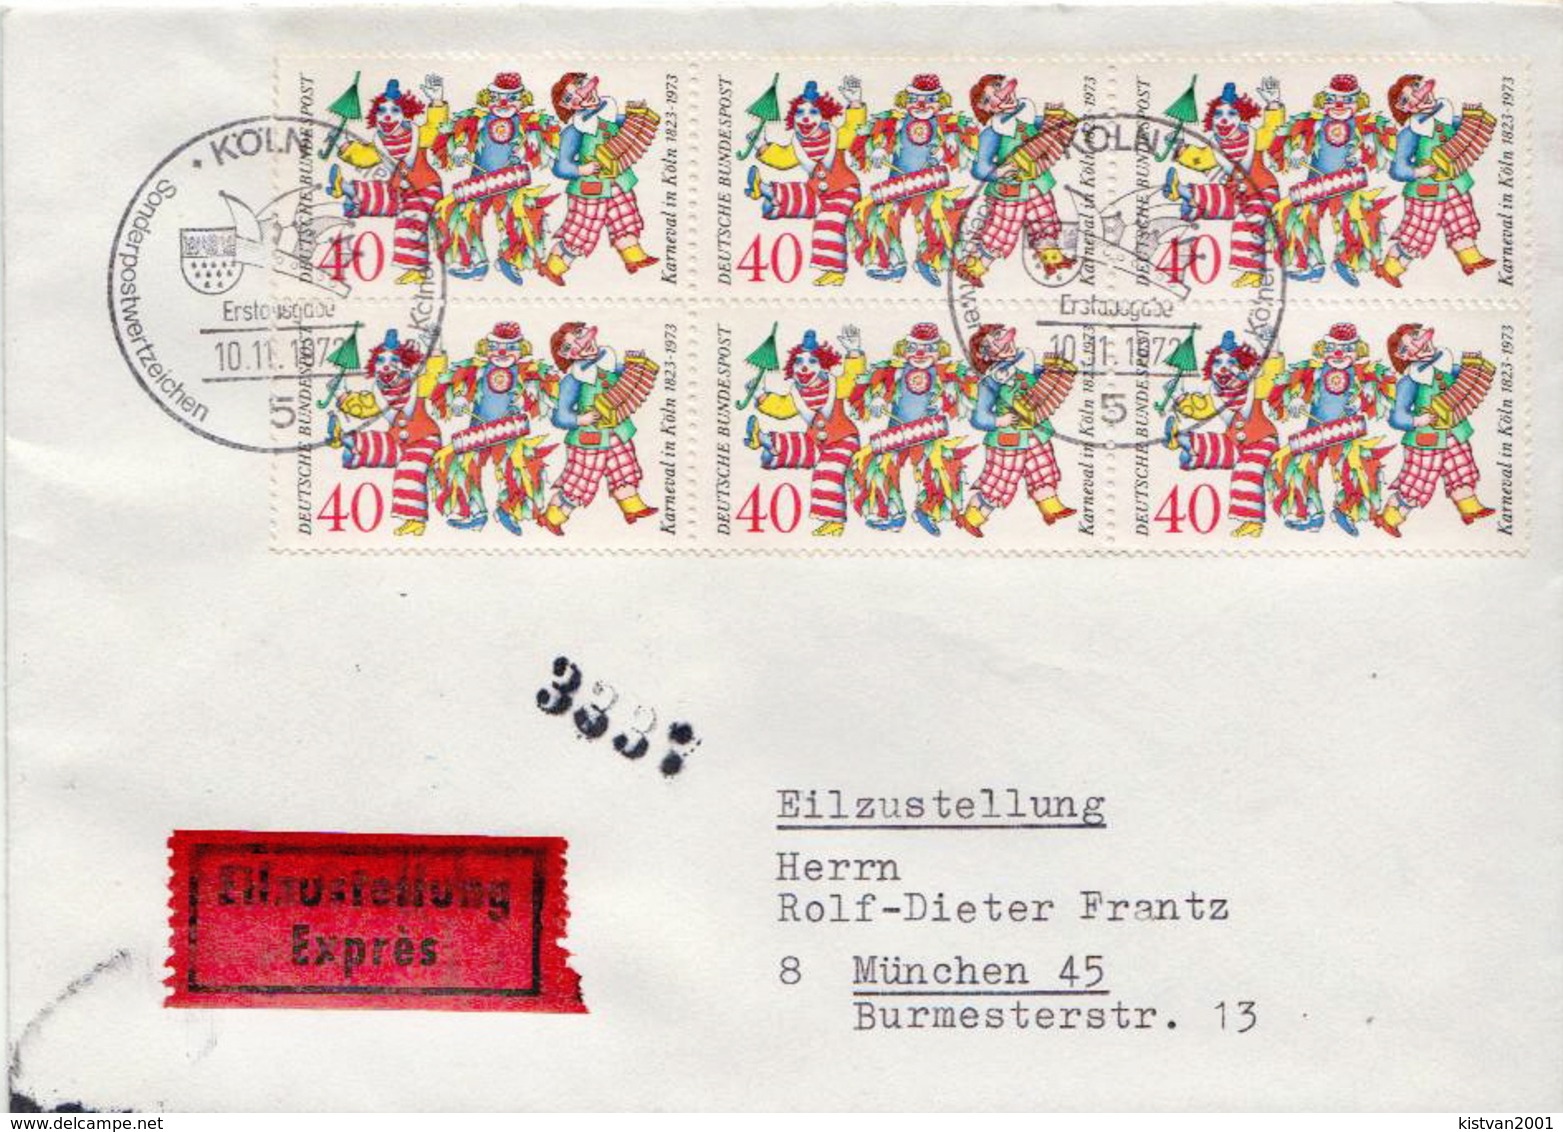 Postal History Cover: Germany Stamps On Express Cover - Music